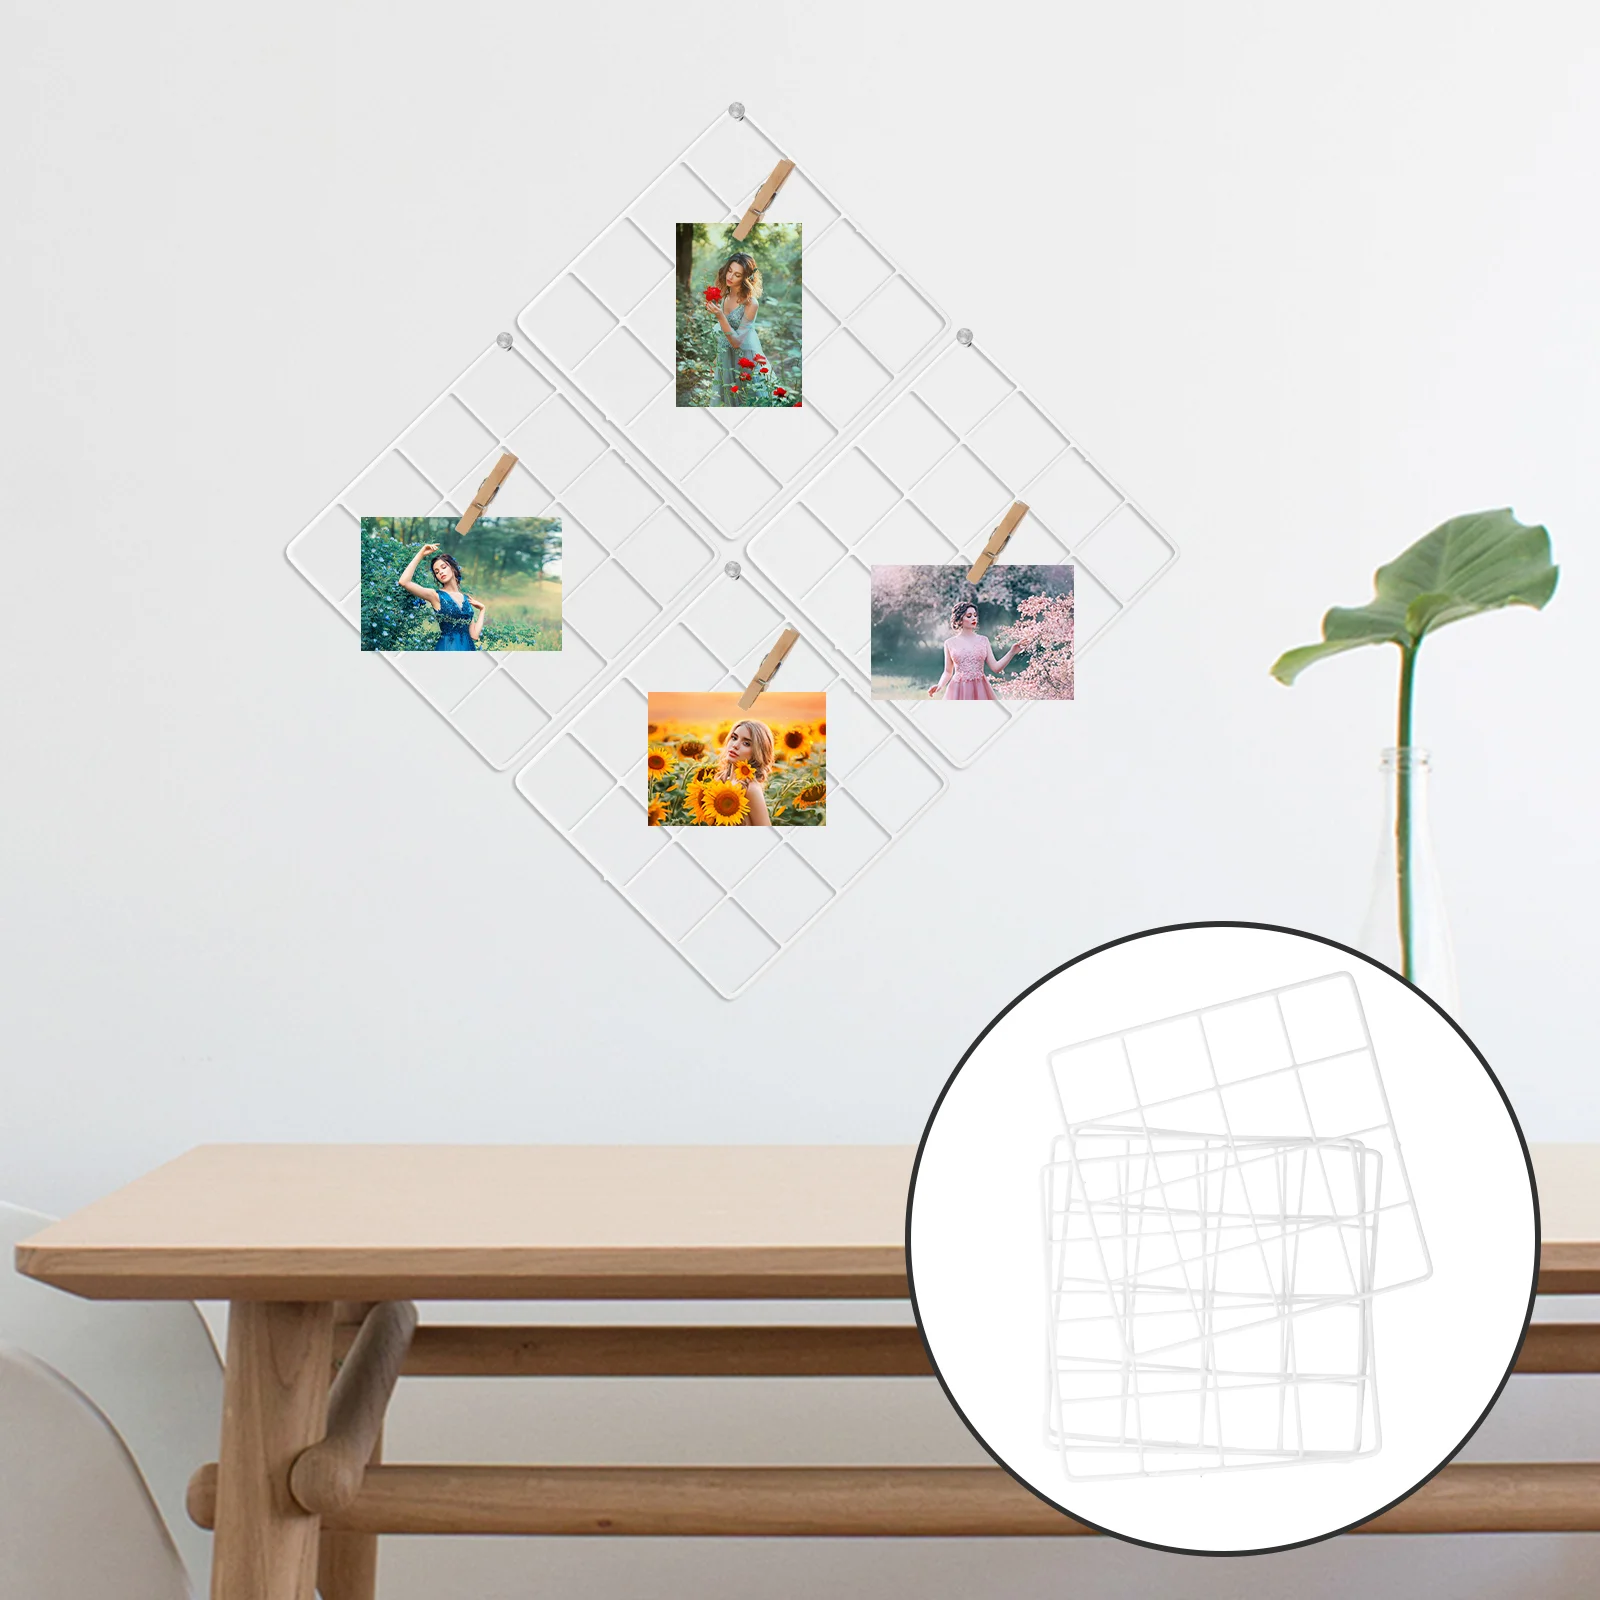 

4pcs Wire Wall Grid Panel Diy Photos And Pictures Display Grid Wall Panel Home Wall Display Panel